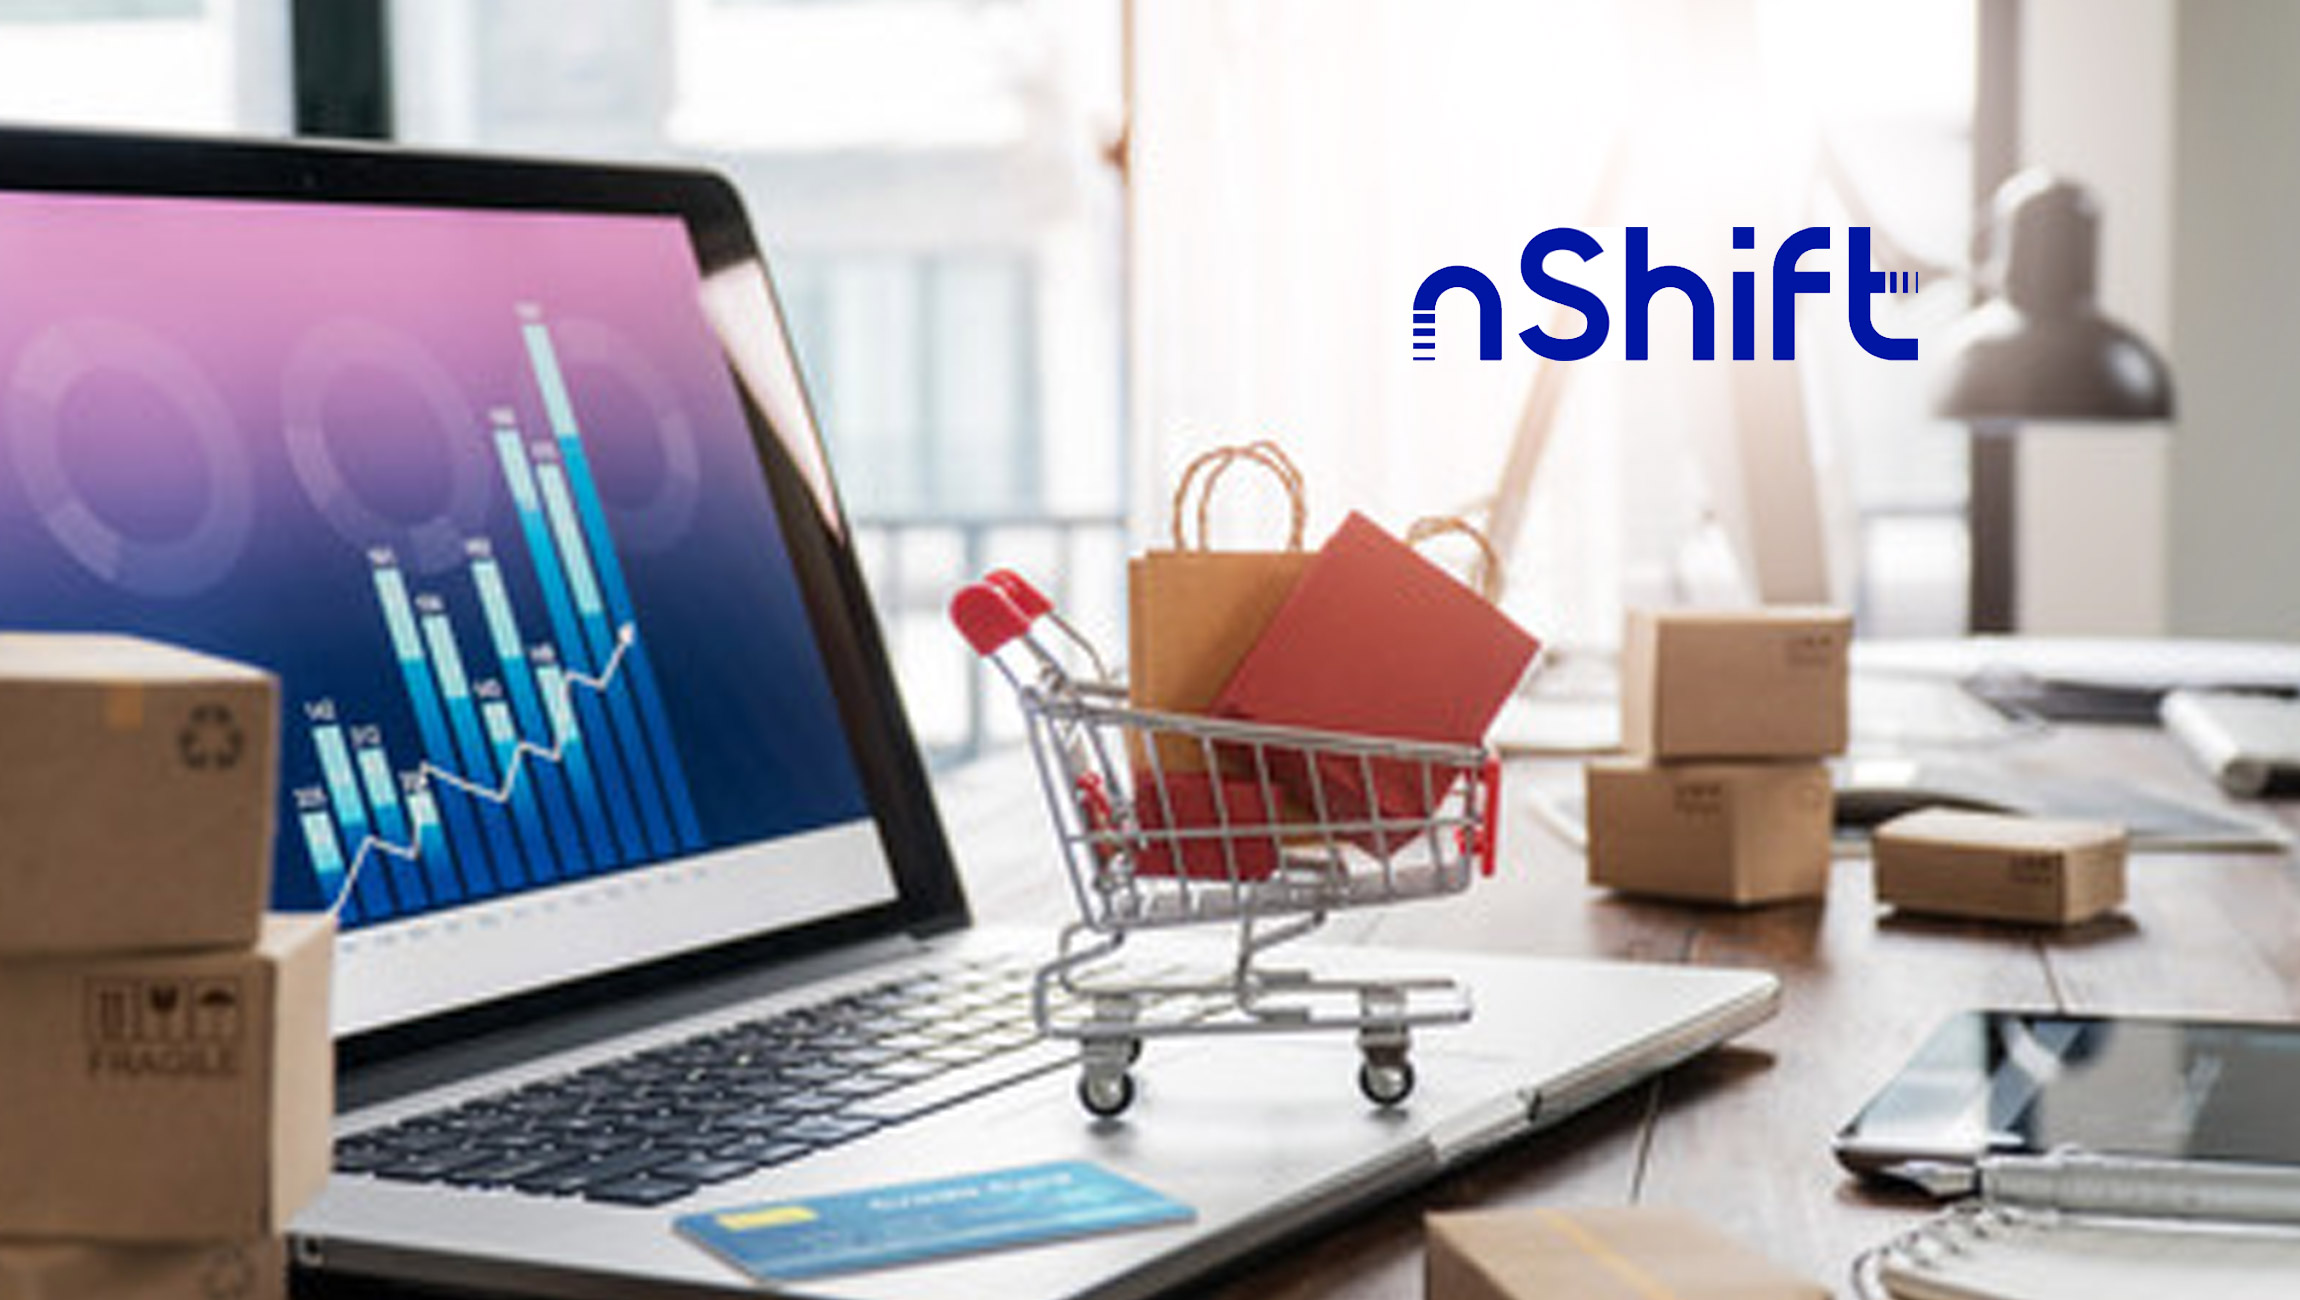 nShift: Branded Delivery Experience "Drives Customer Recommendations" In Retail